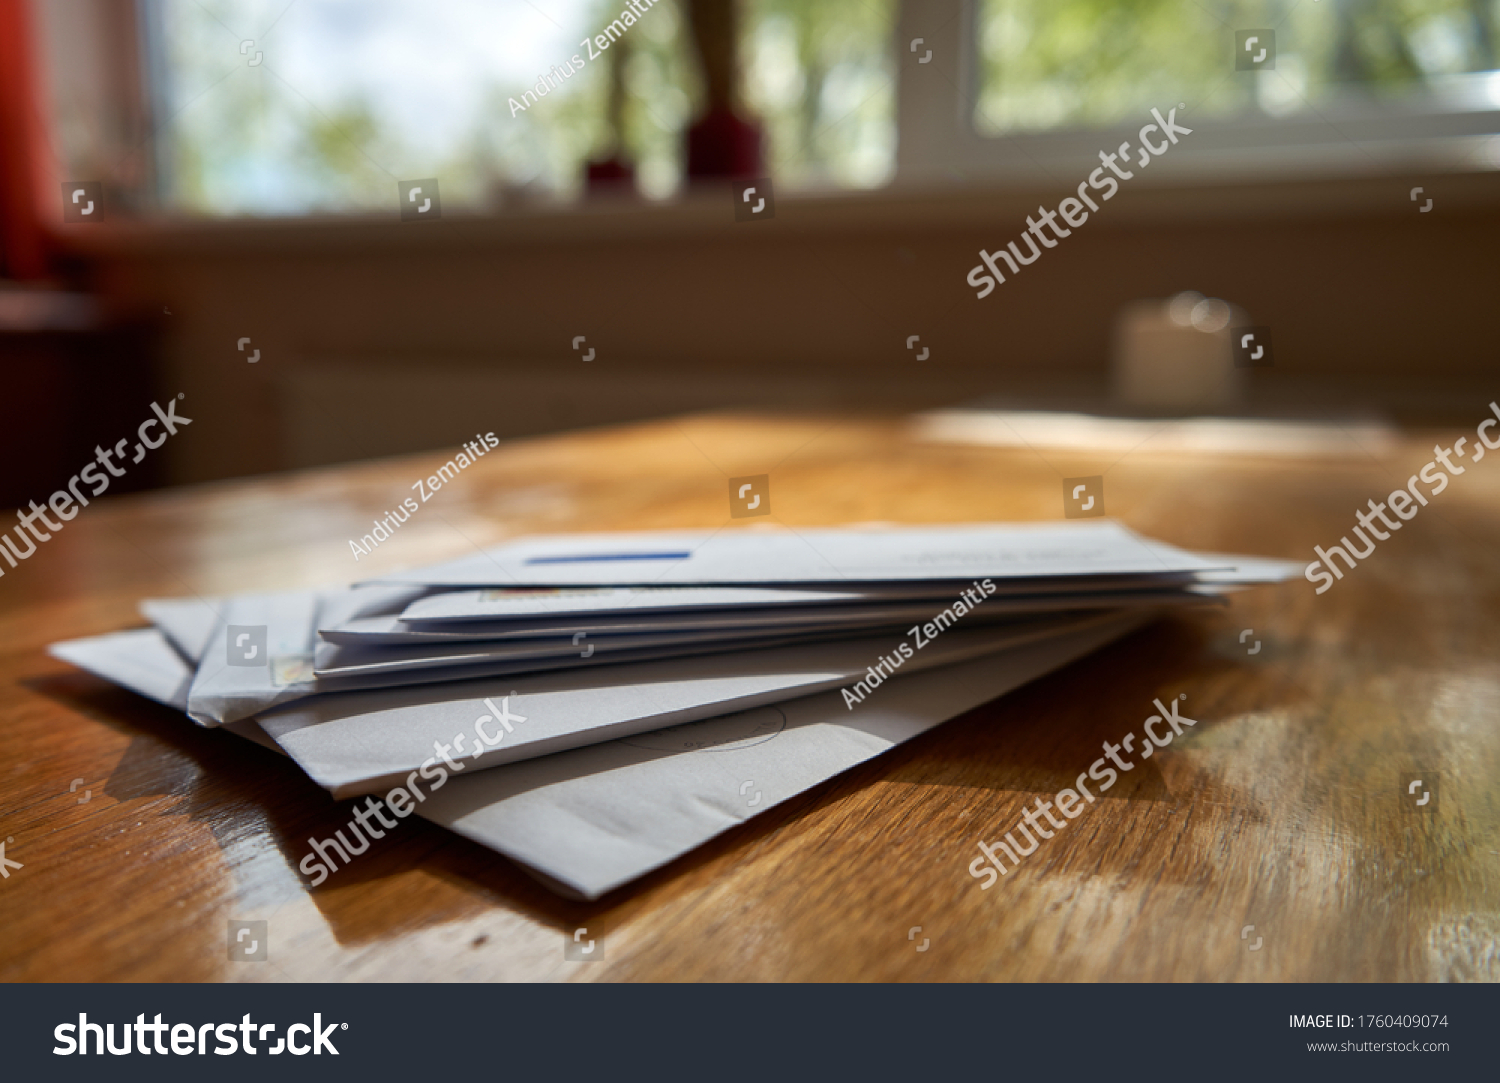 Bunch of envelopes in the kitchen #1760409074